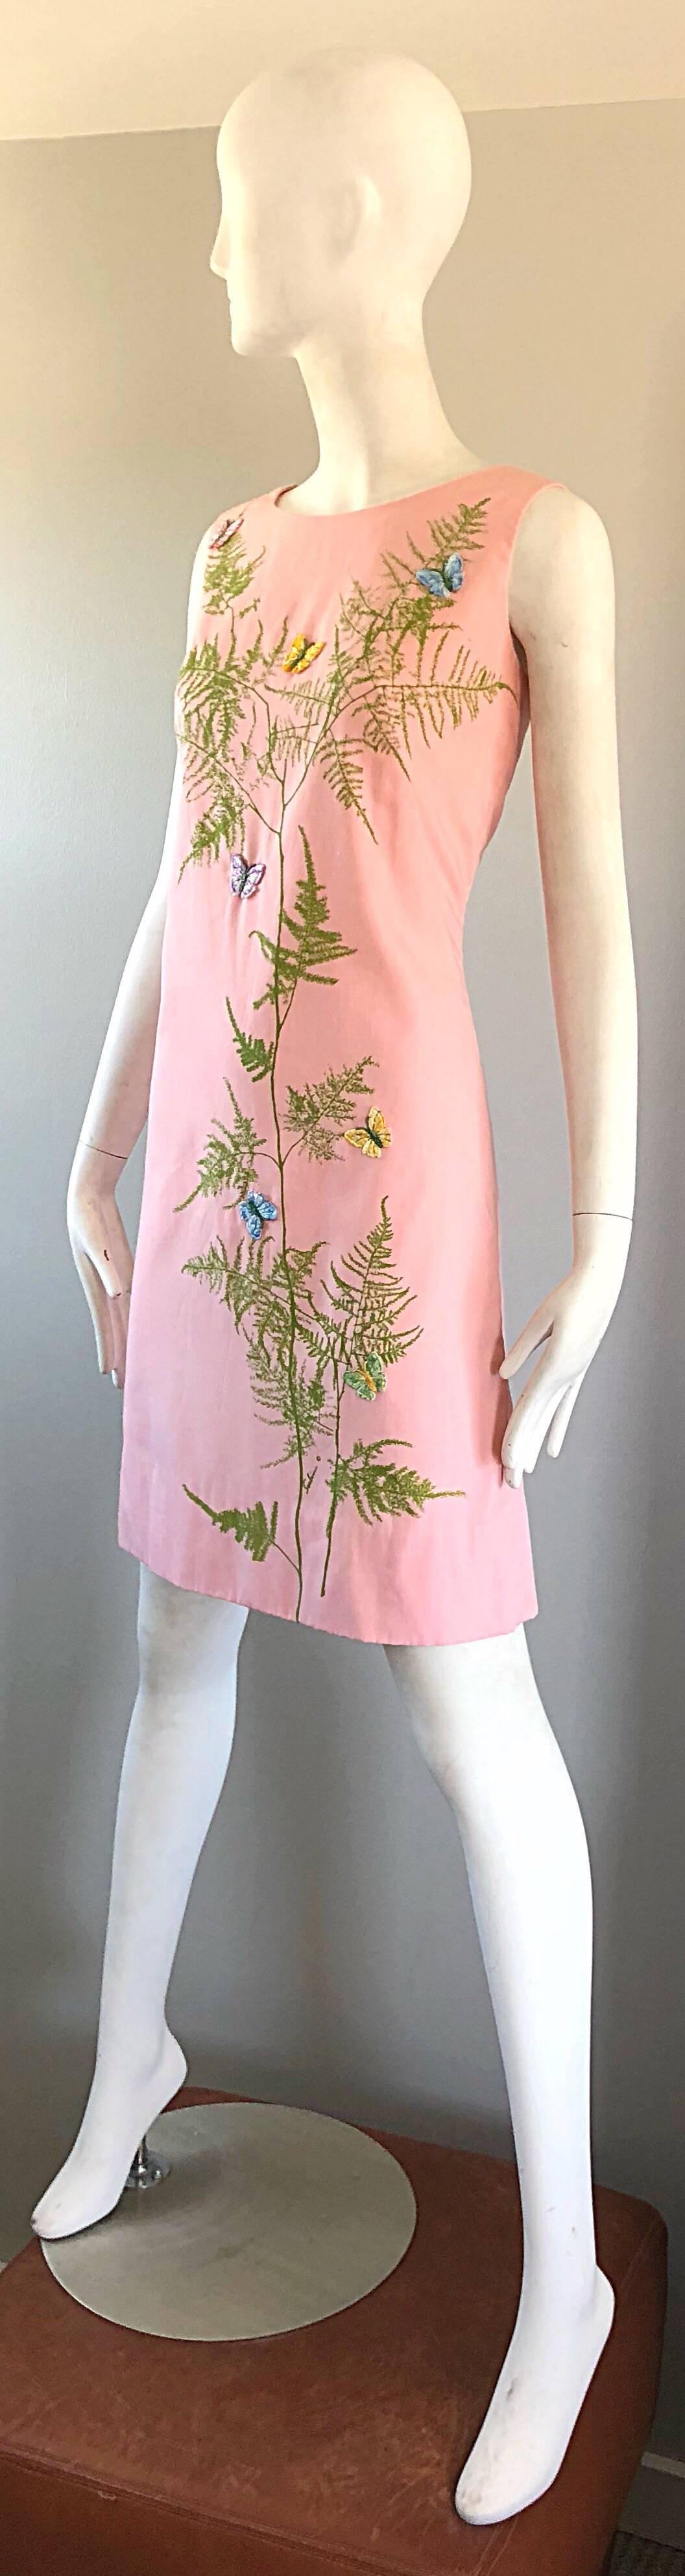 Chic 1960s Pale Pink Trees + Embrodiered Butterflies Novelty Vintage Shift Dress 3